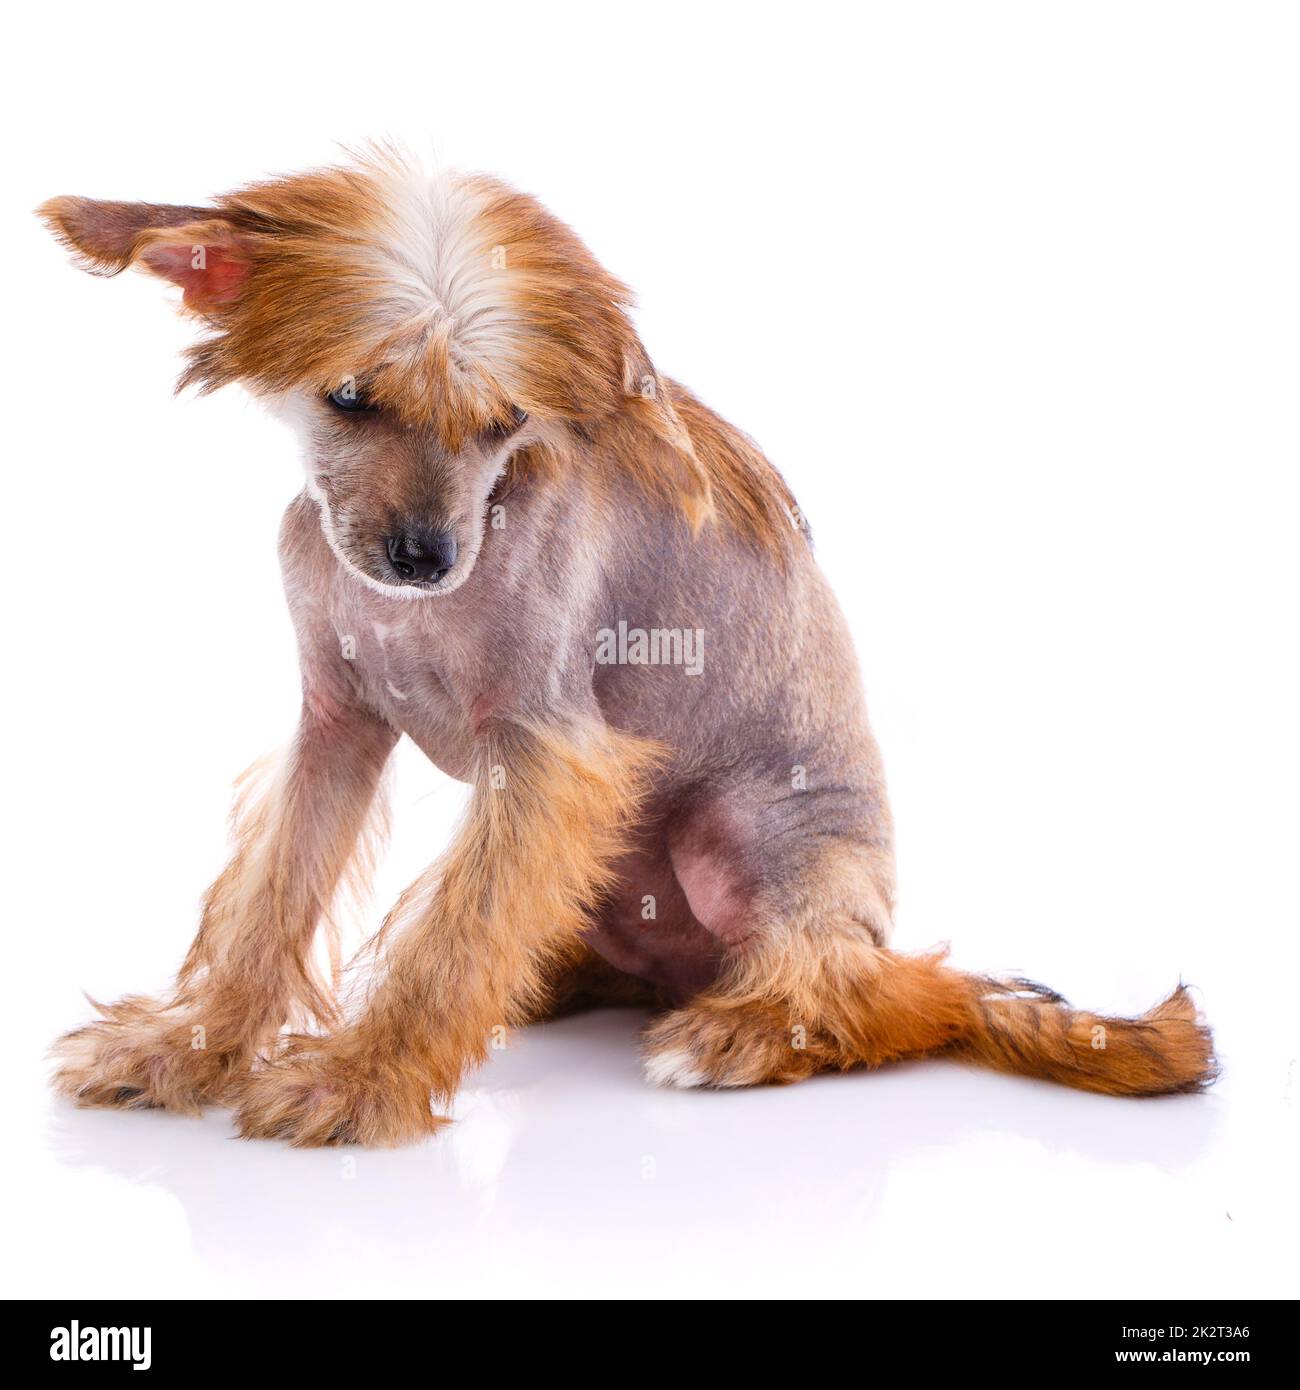 Chinese Crested Dog sitting in front of white background. Stock Photo